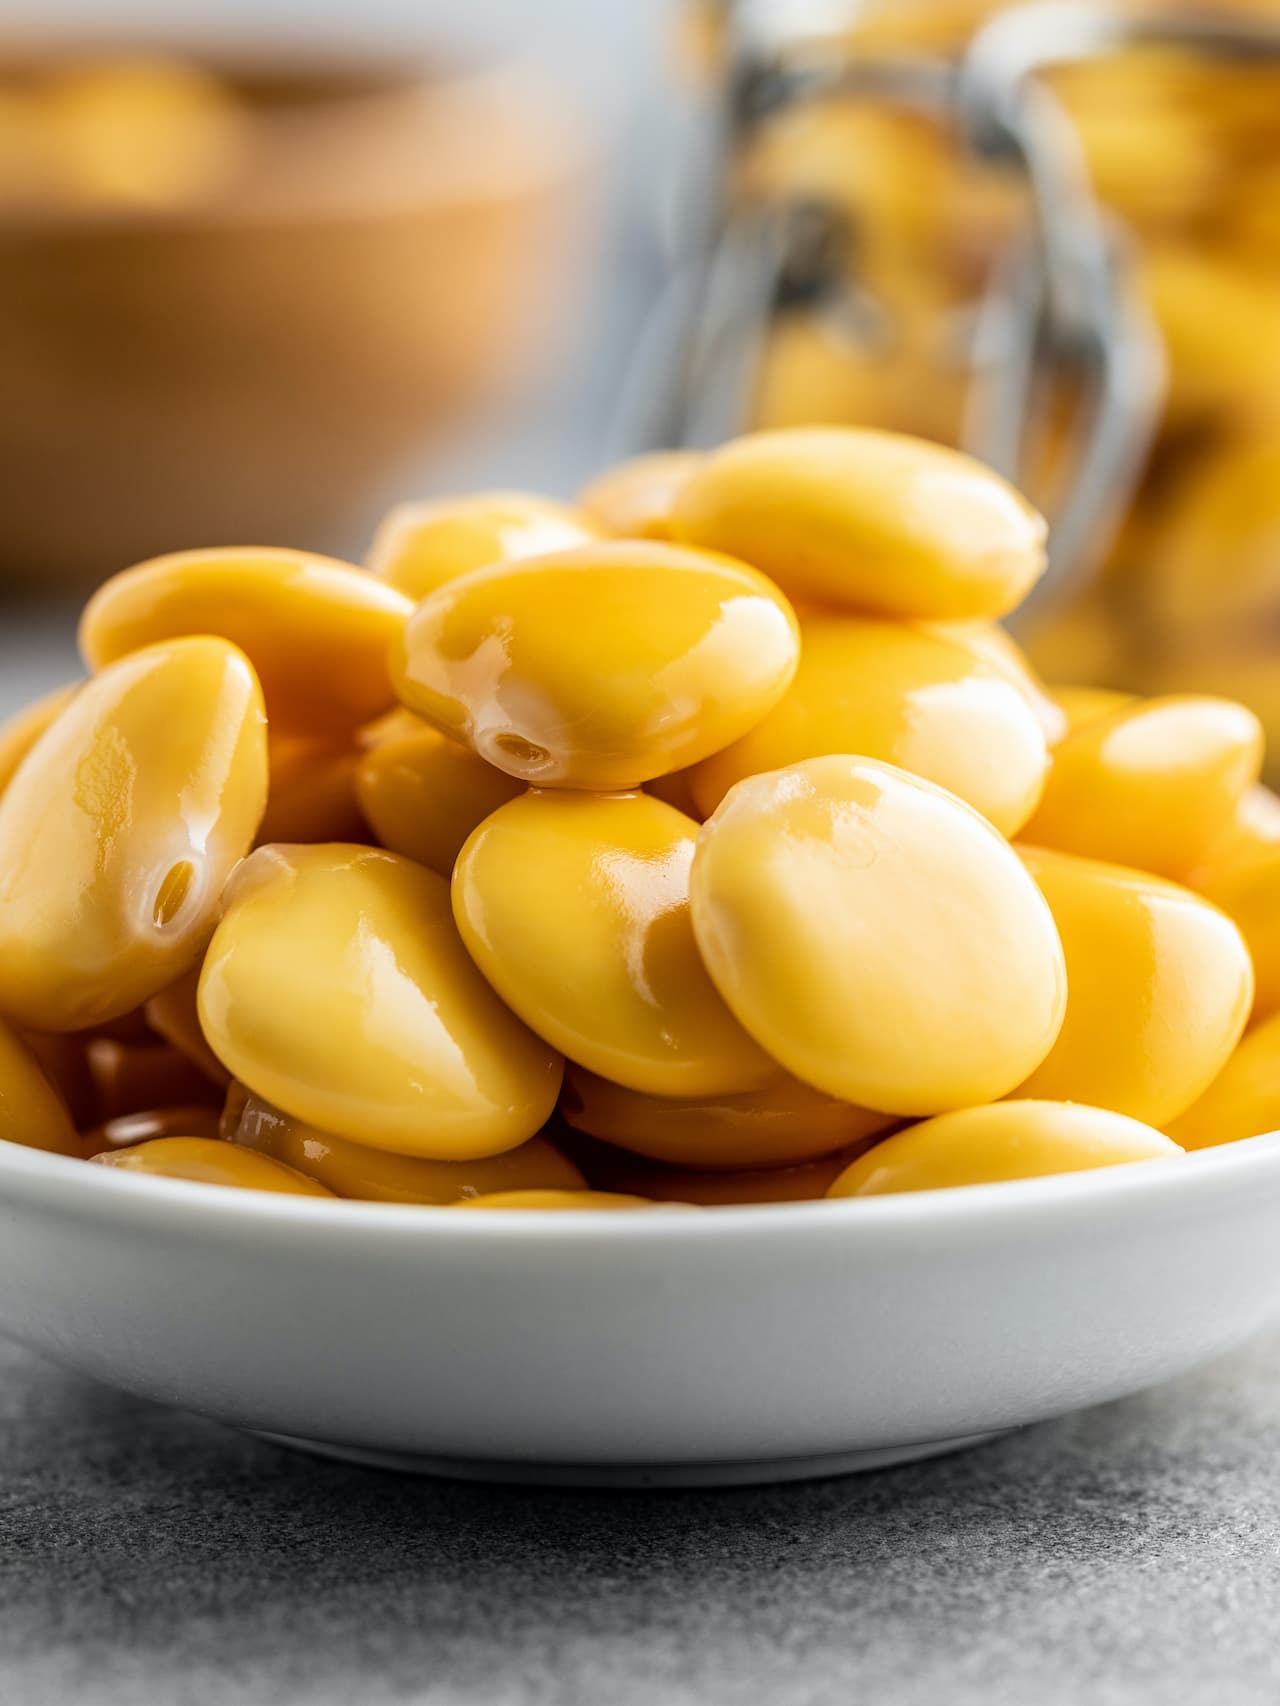 Discover the Booming Benefits of Lupini Beans for Your Hair